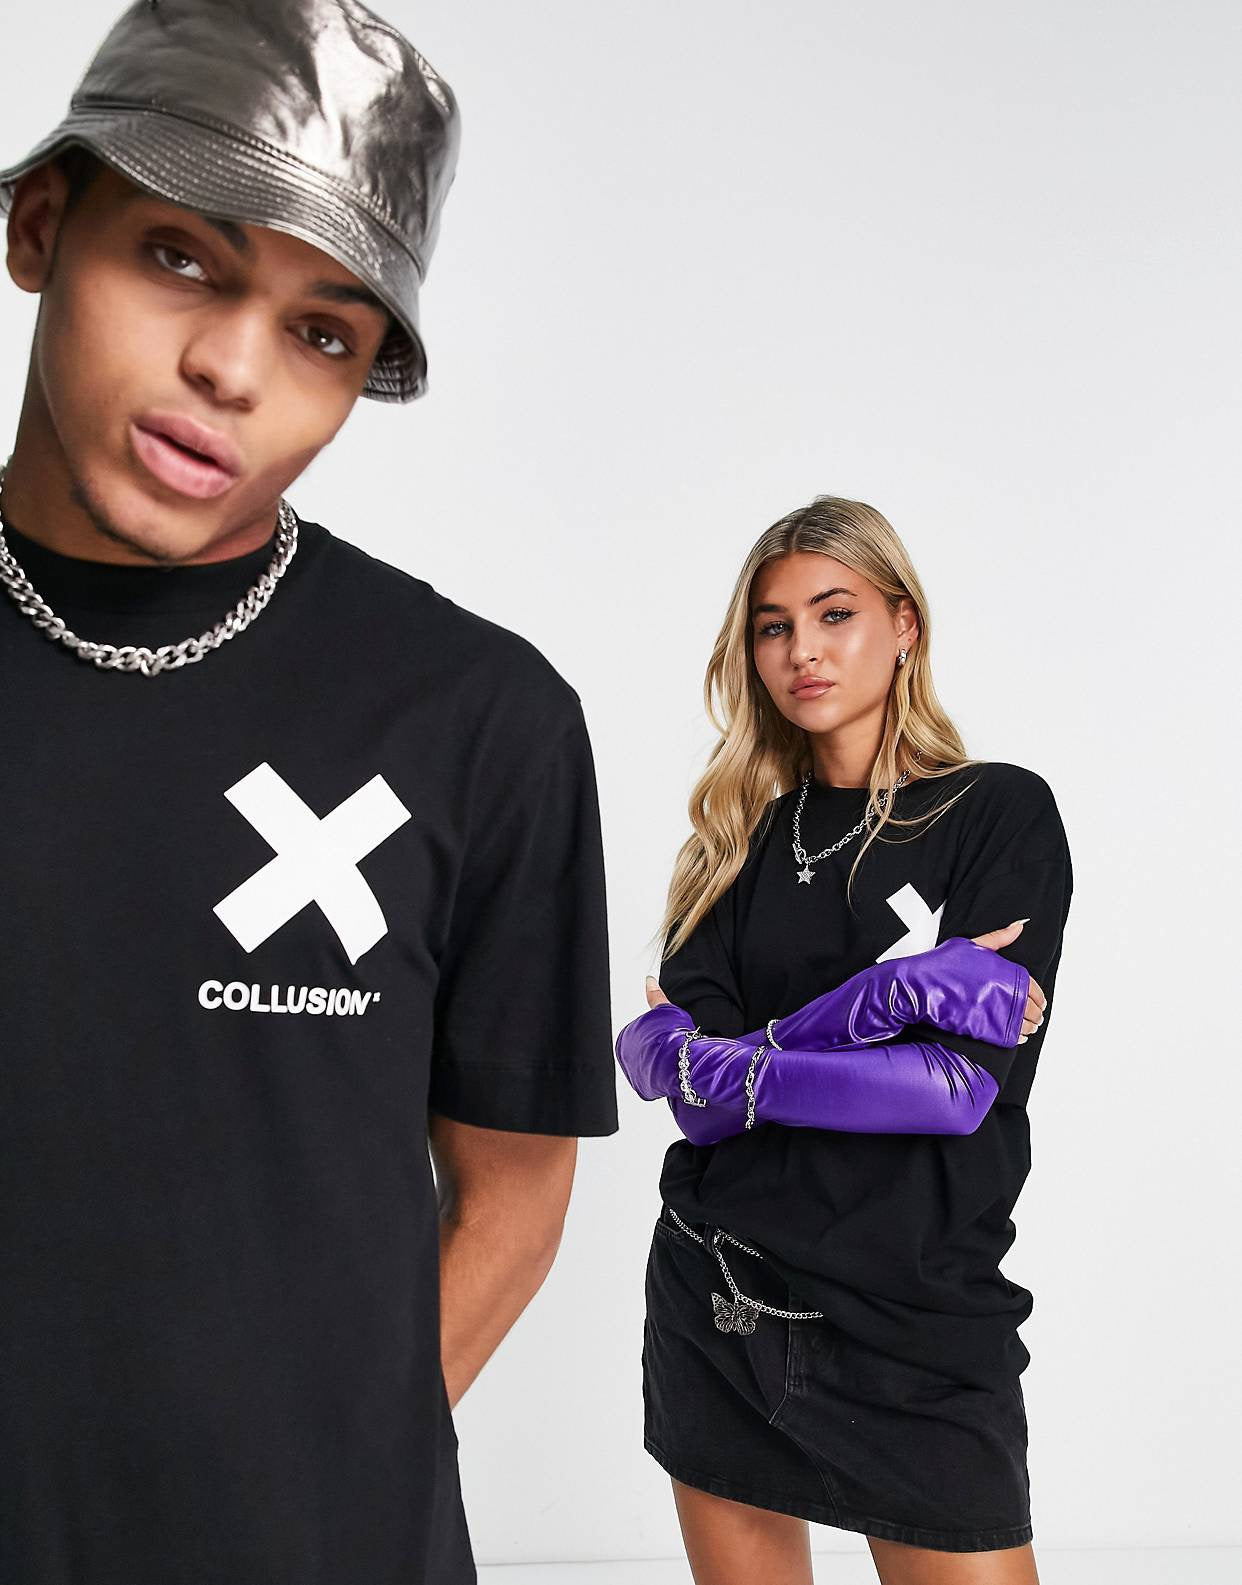 COLLUSION Unisex logo cotton t-shirt in off-white